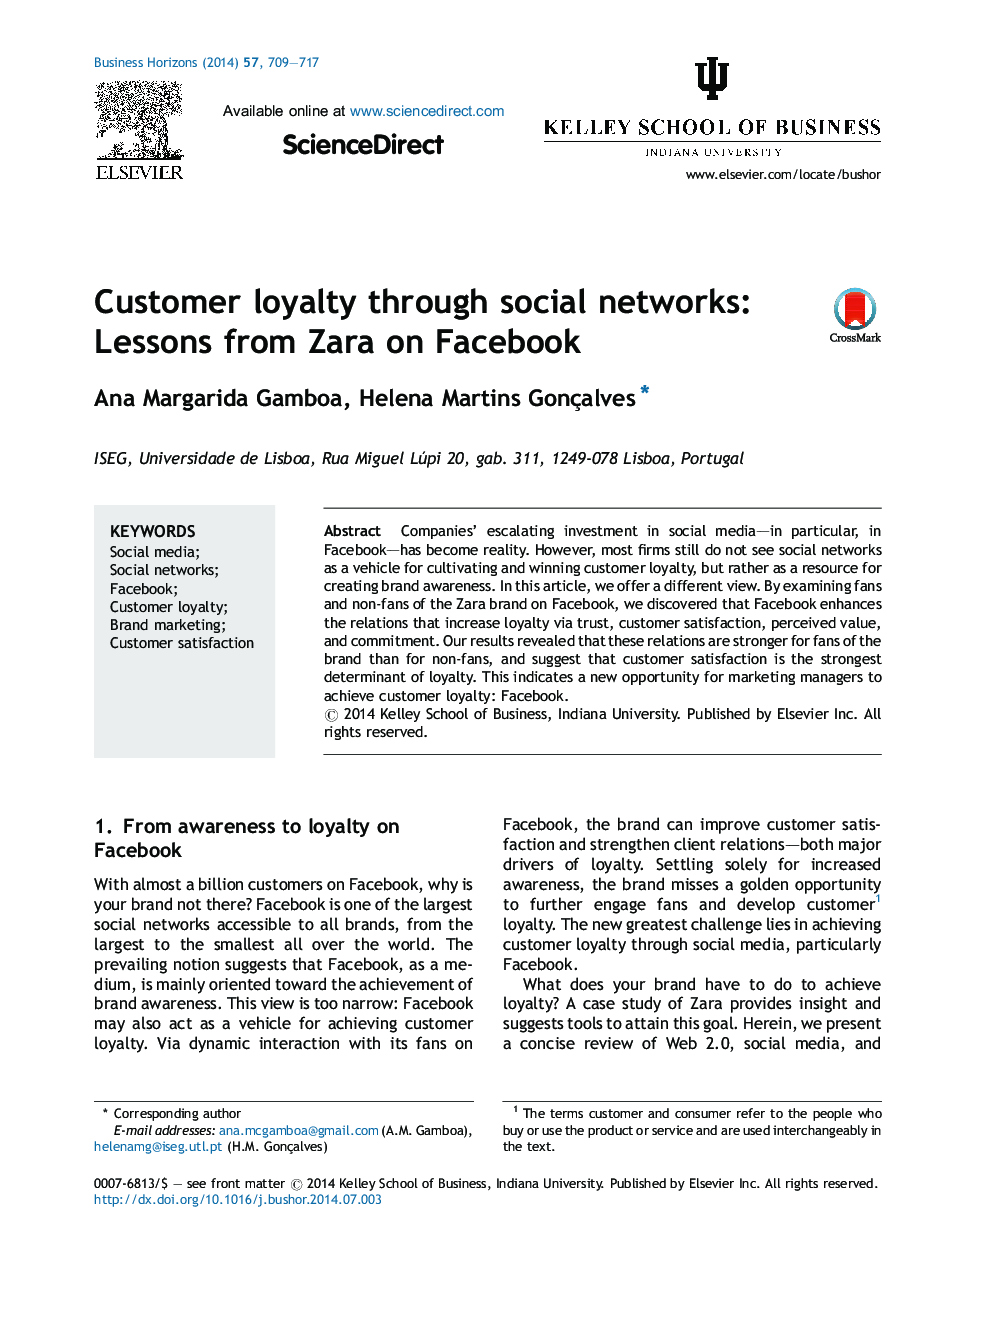 Customer loyalty through social networks: Lessons from Zara on Facebook